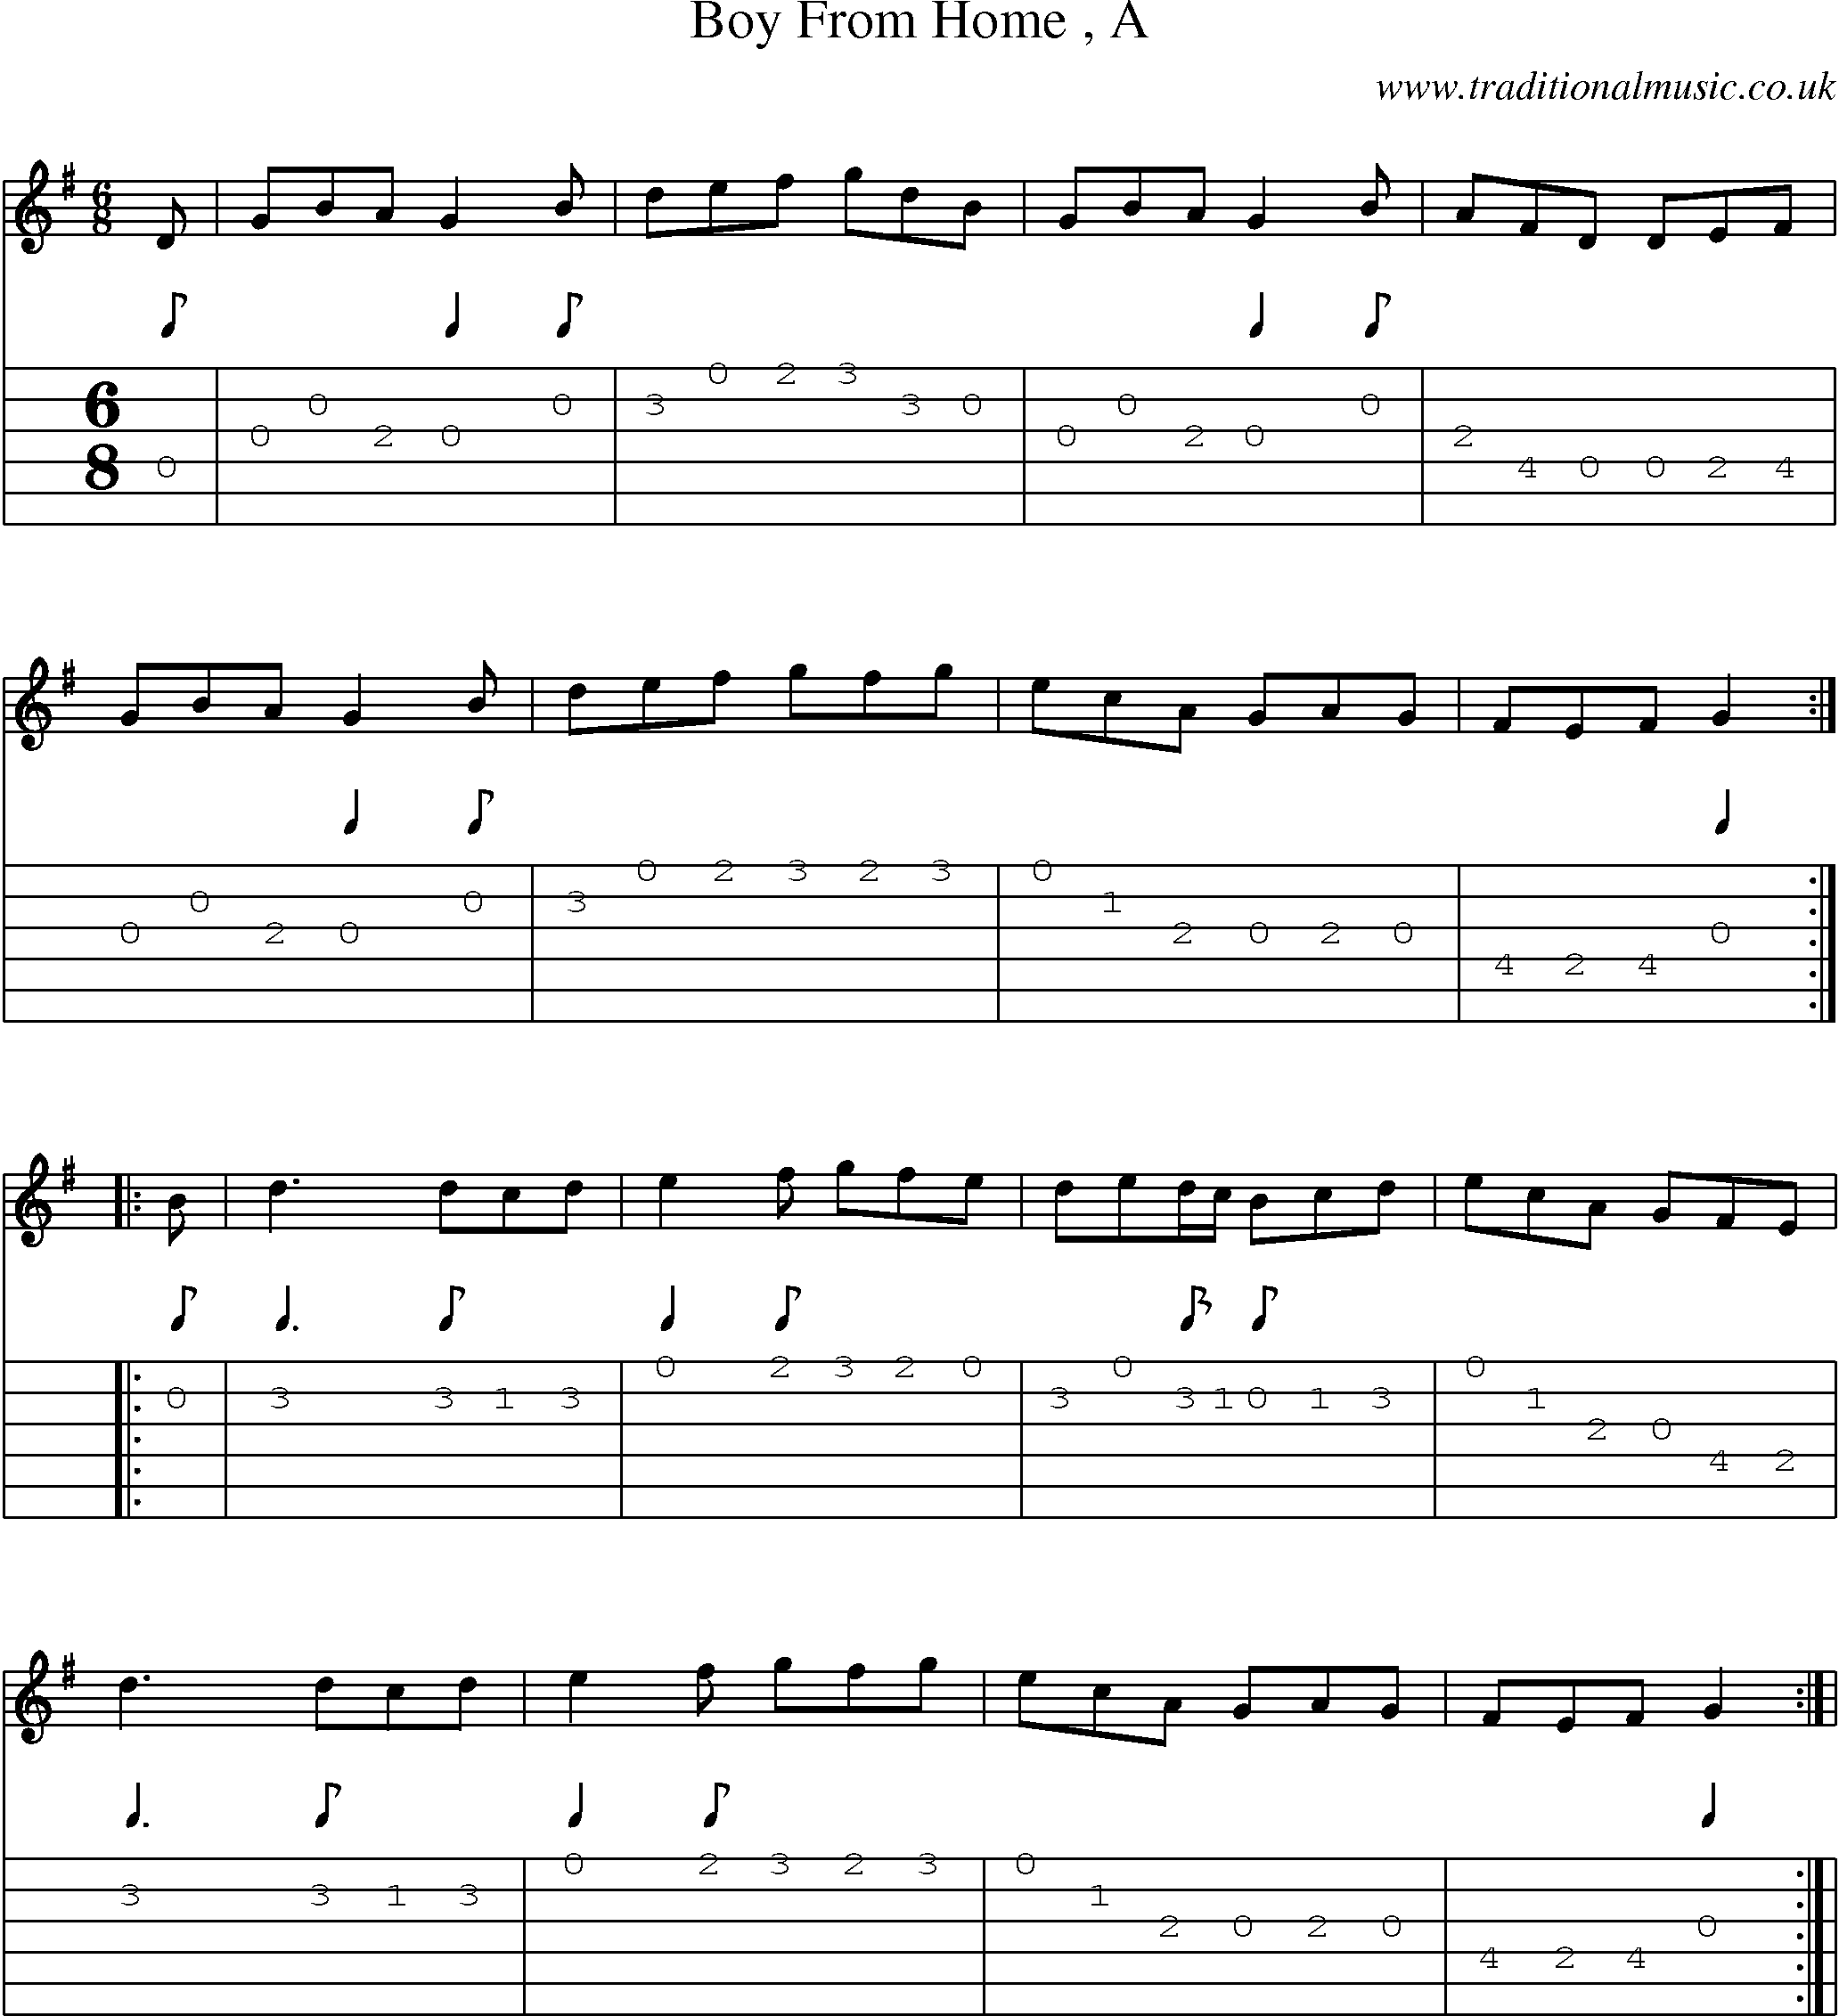 Music Score and Guitar Tabs for Boy From Home A